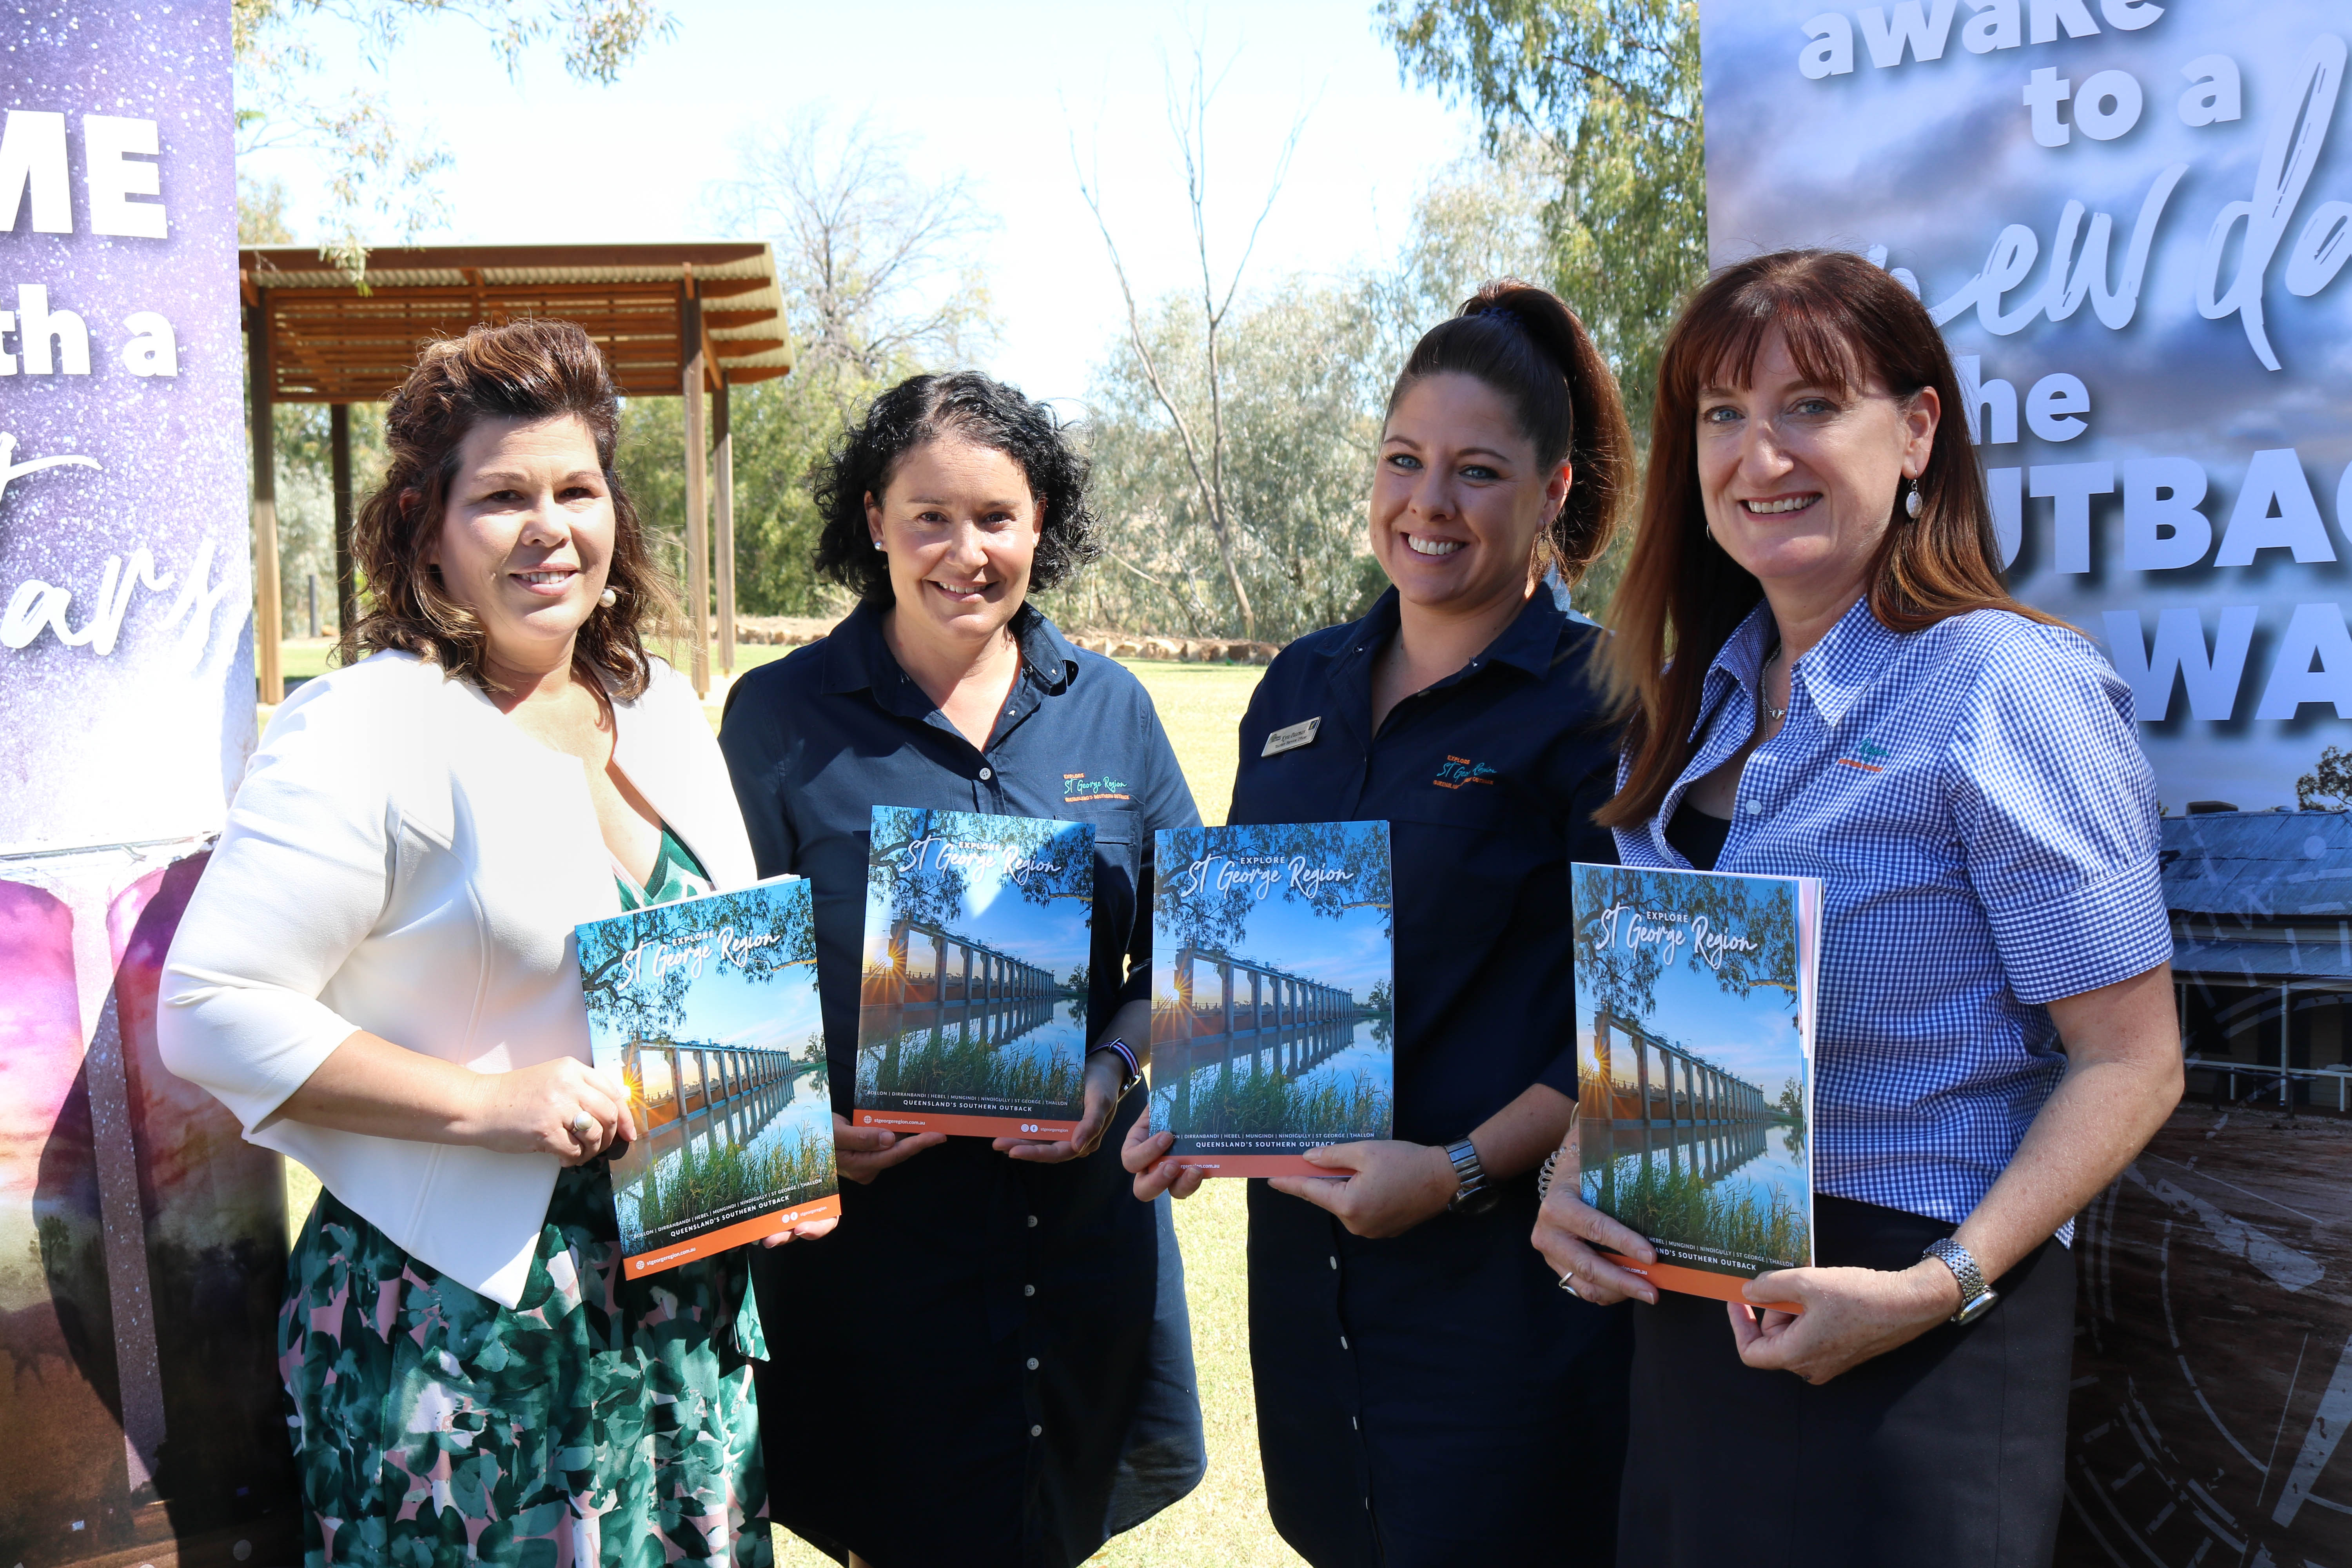 Four women stand together, smiling while holding visitor information brochures.